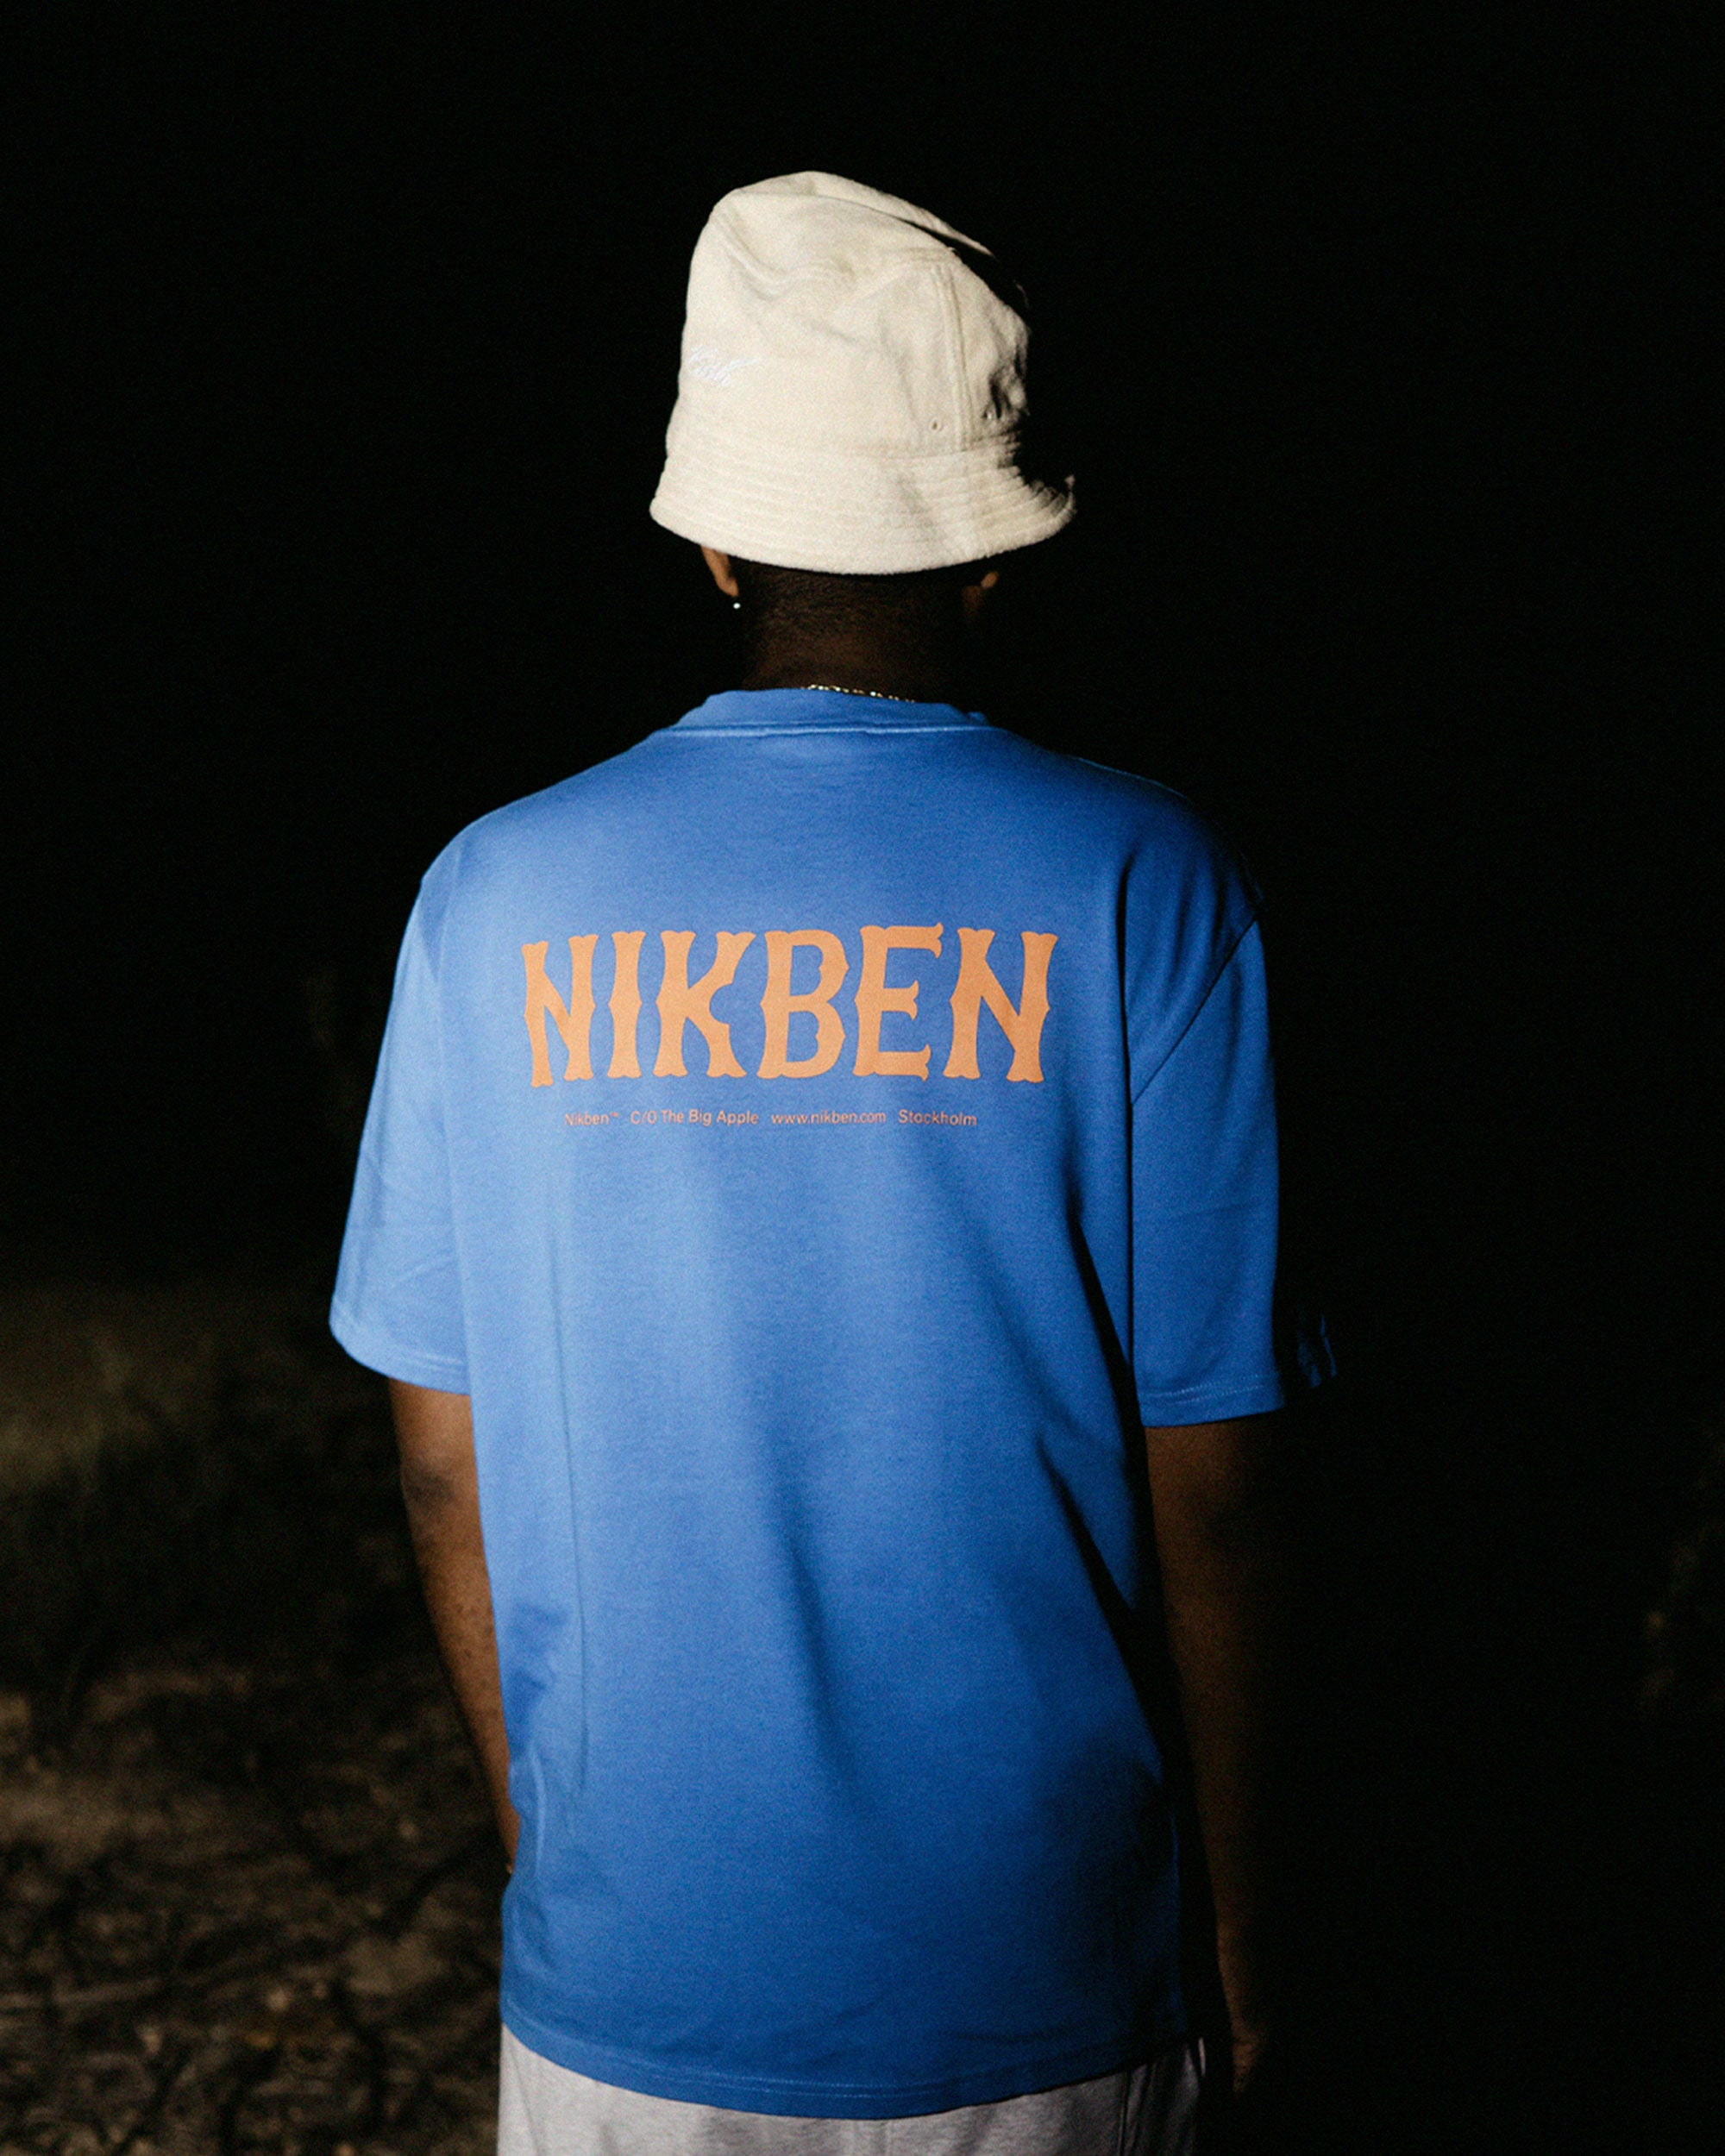 Back view of male model wearing a blue t-shirt with orange 